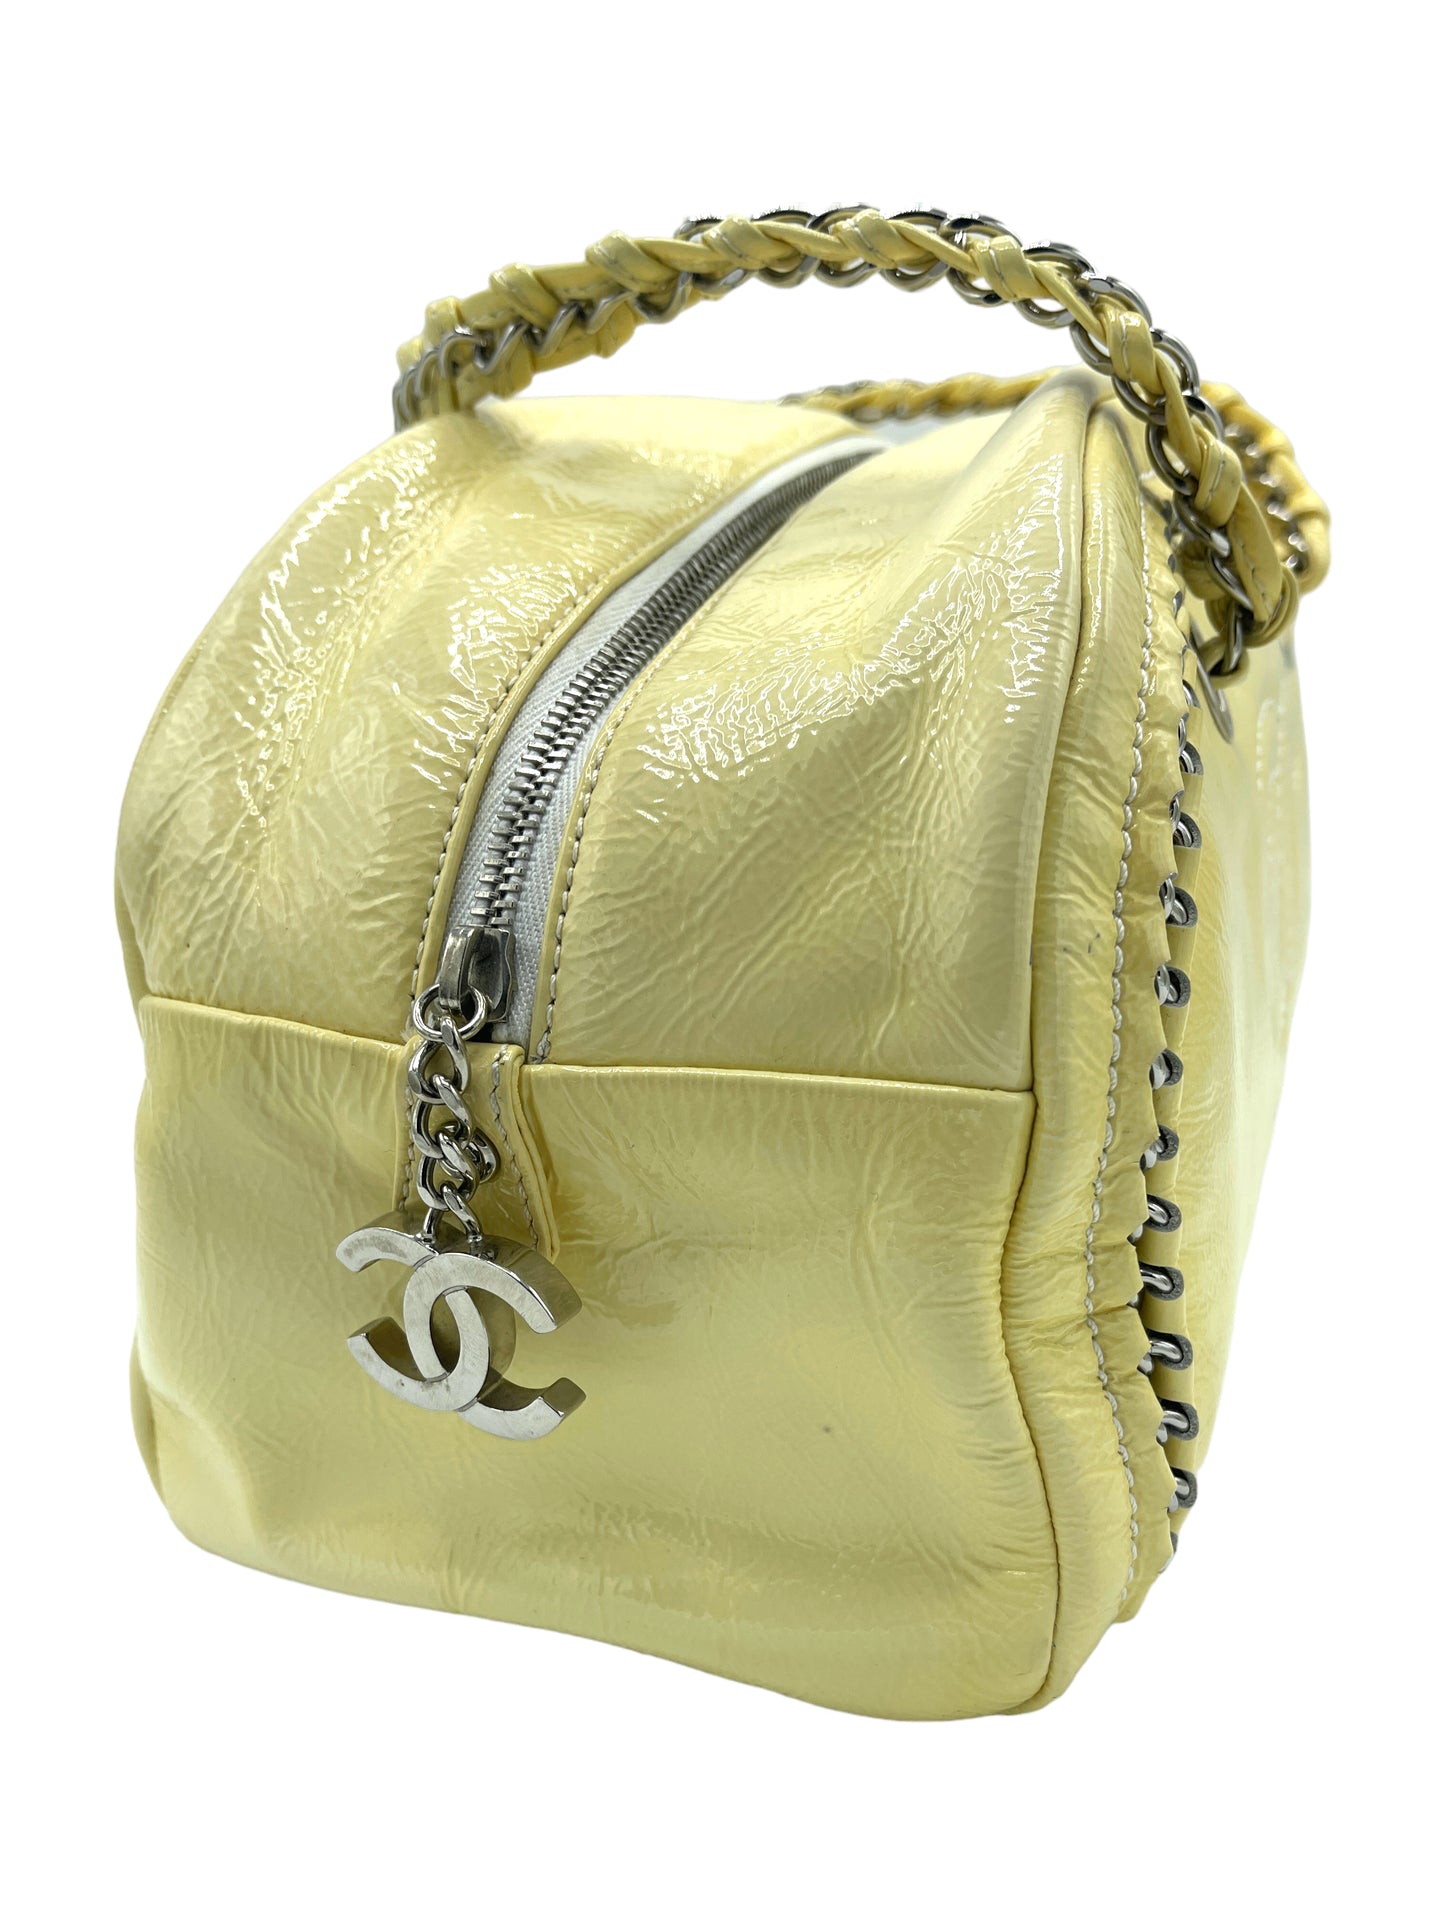 Chanel Yellow Patent Leather Luxe Ligne Bowler Bag